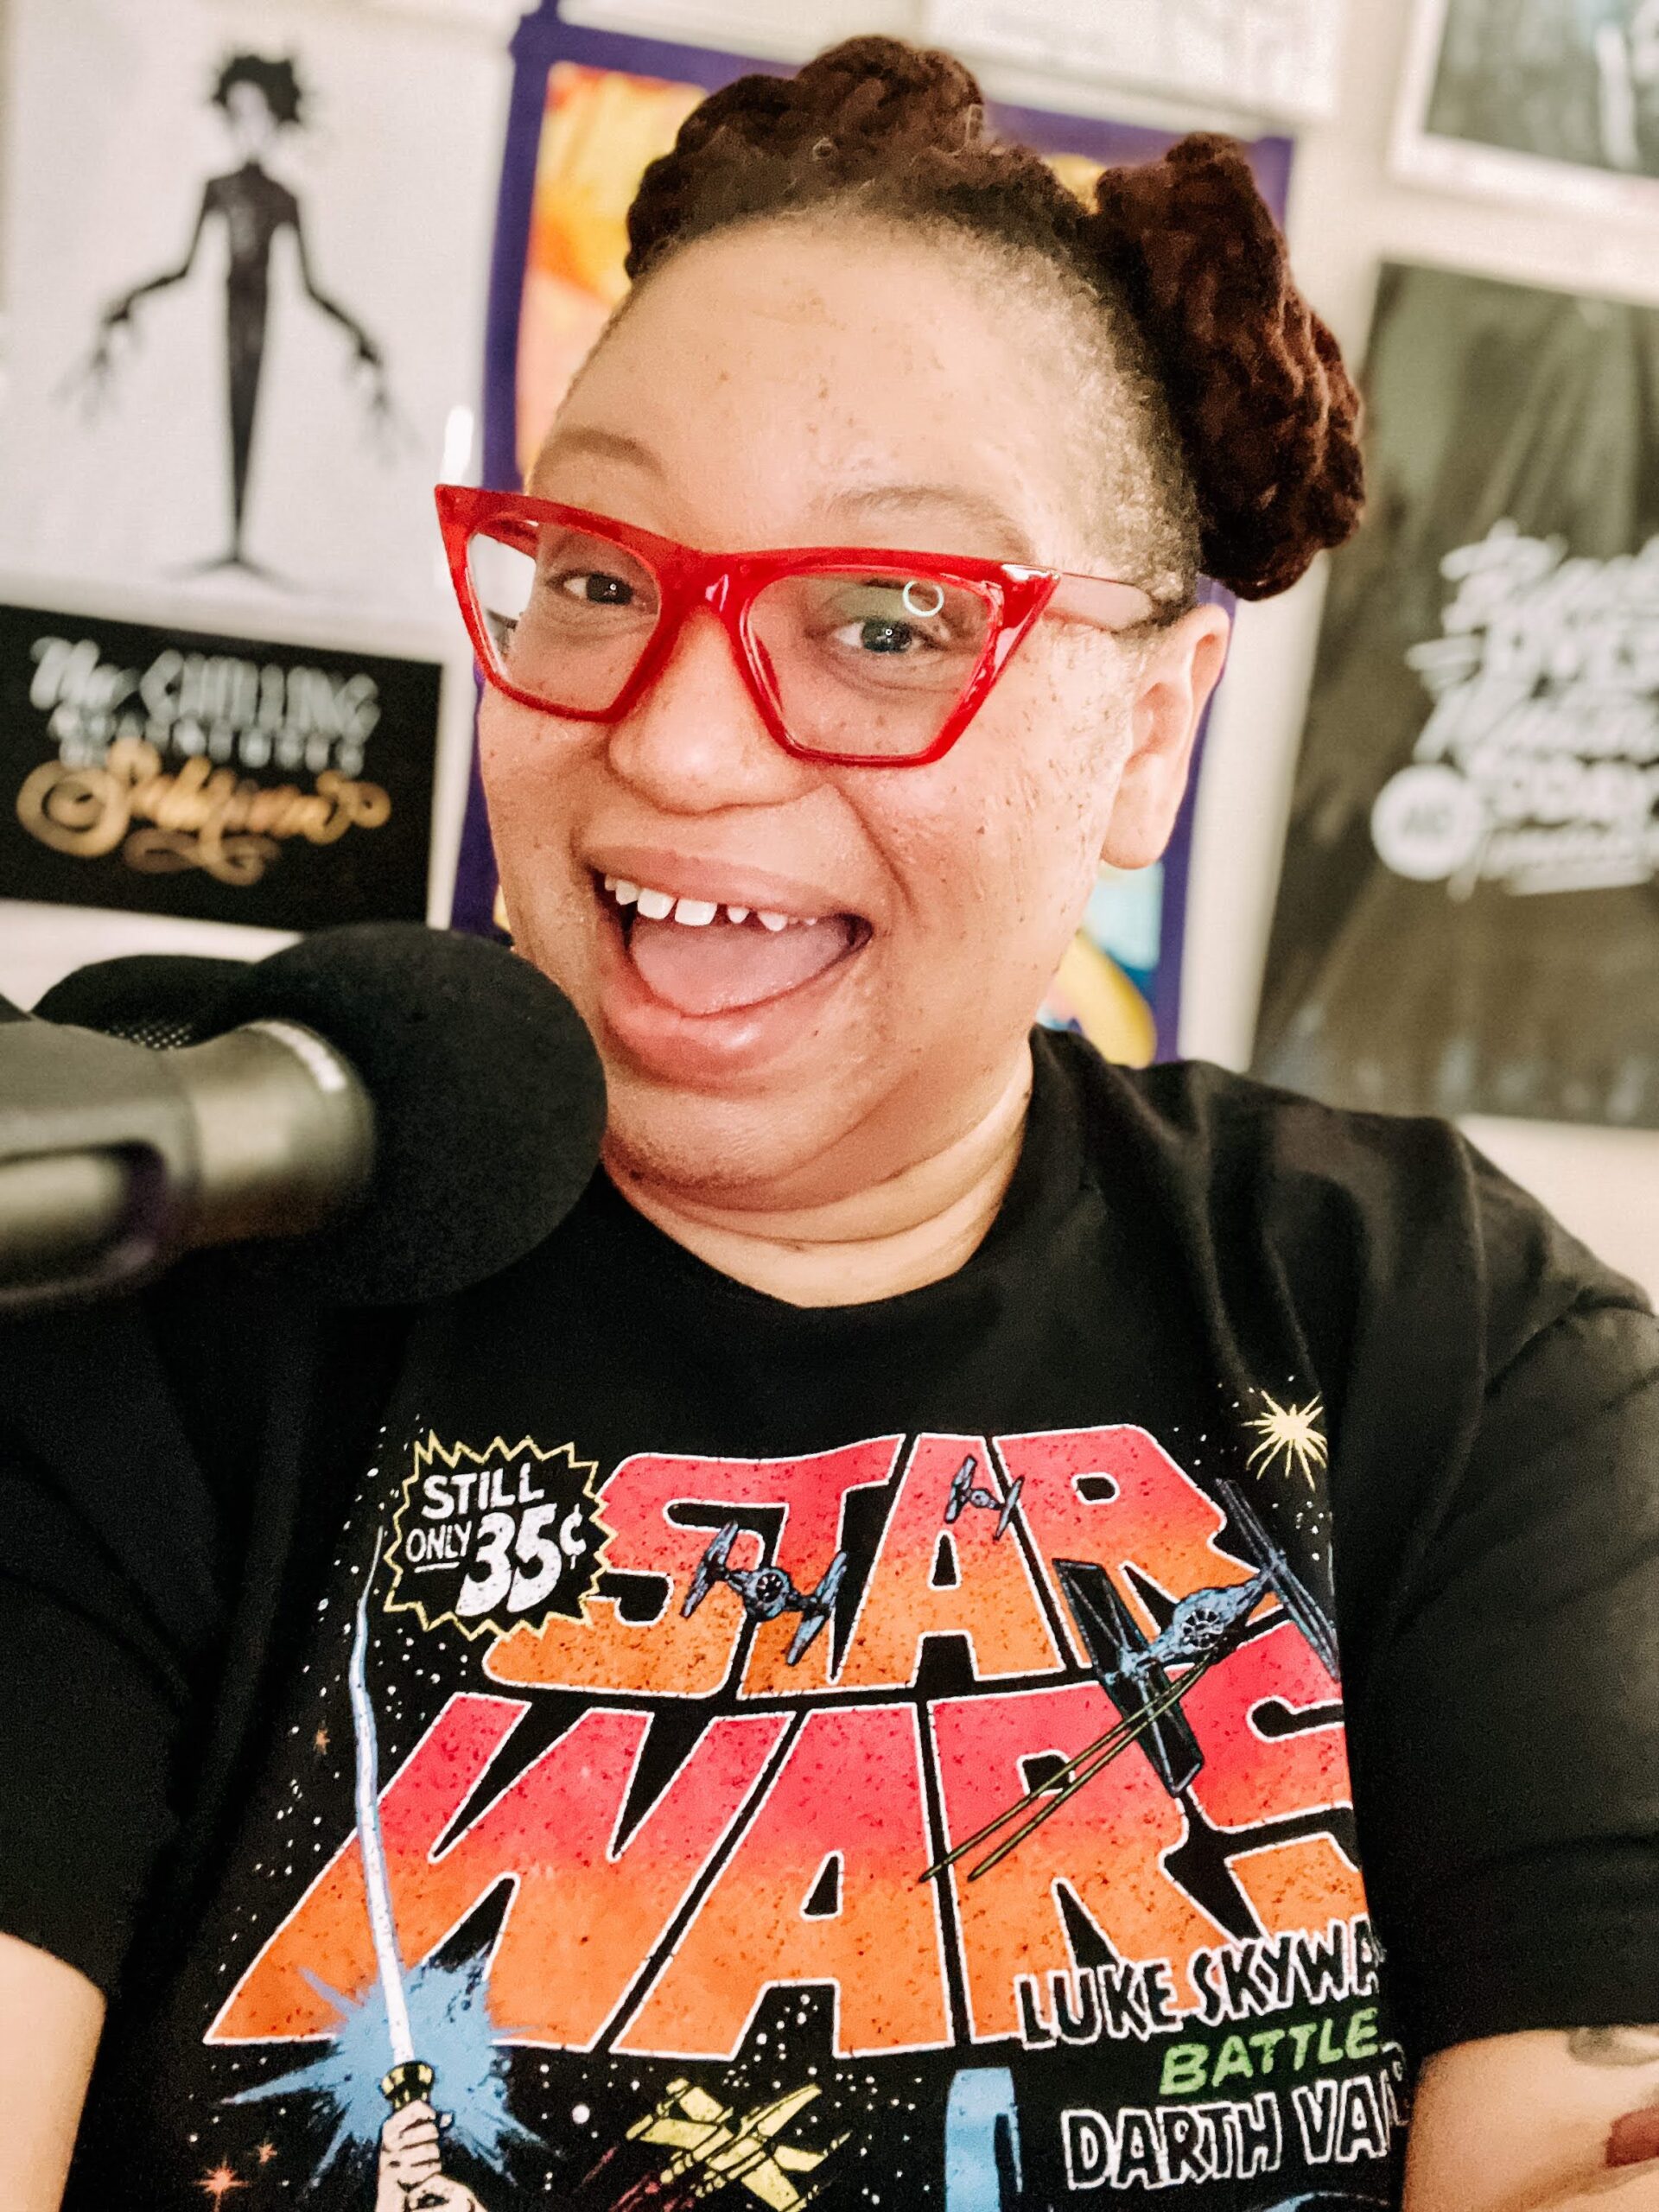 Danielle on the mic for Star Wars Day